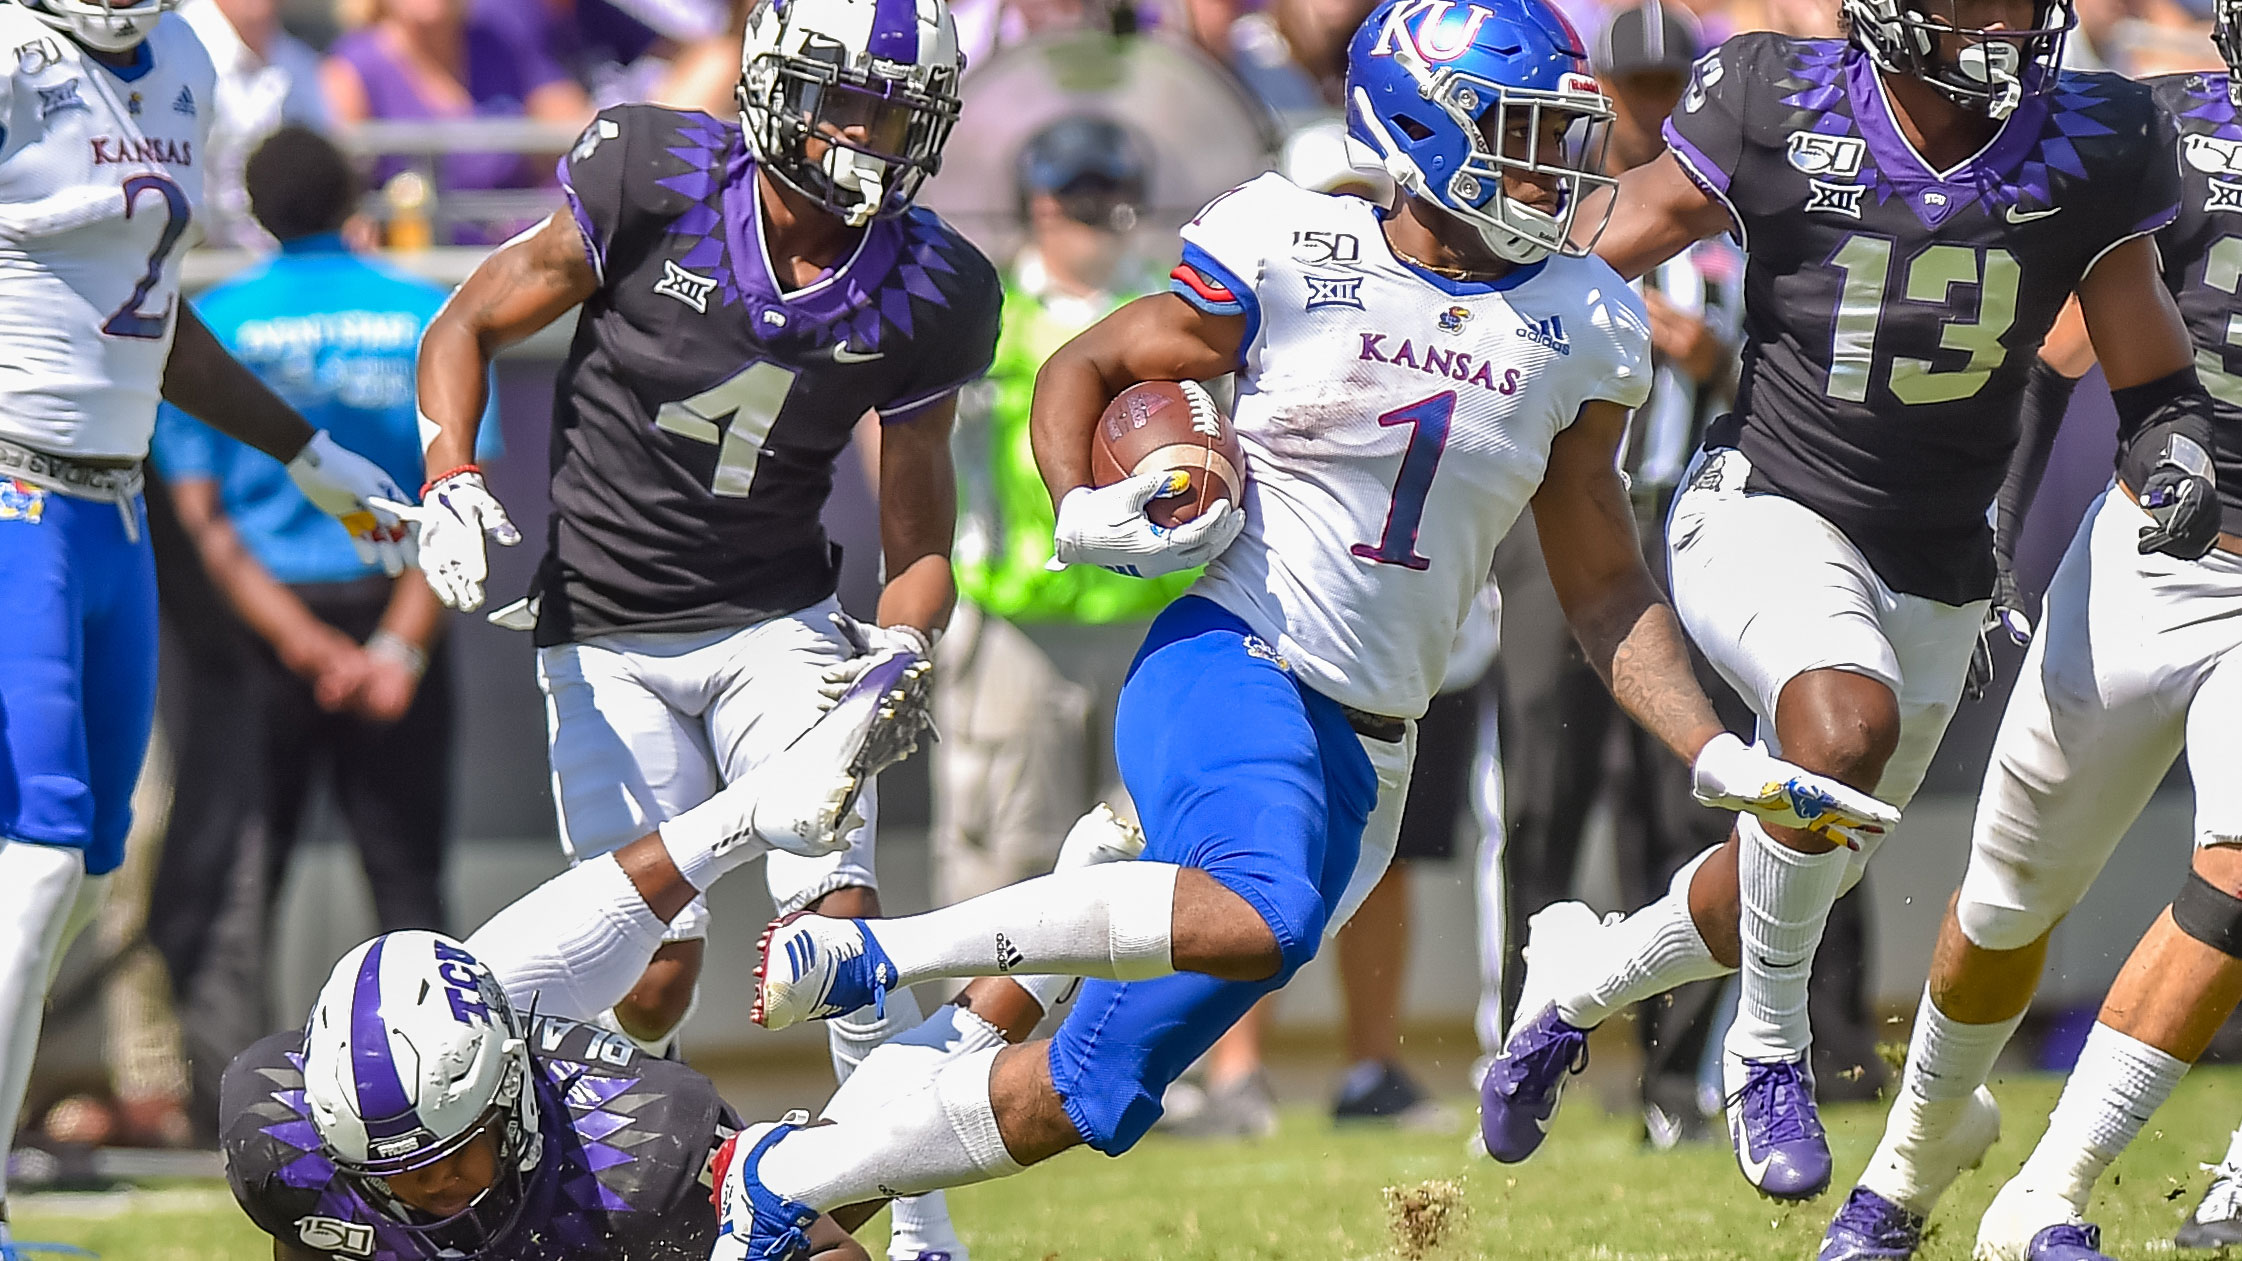 Struggling Jayhawks to host Sooners and their steamroller offense